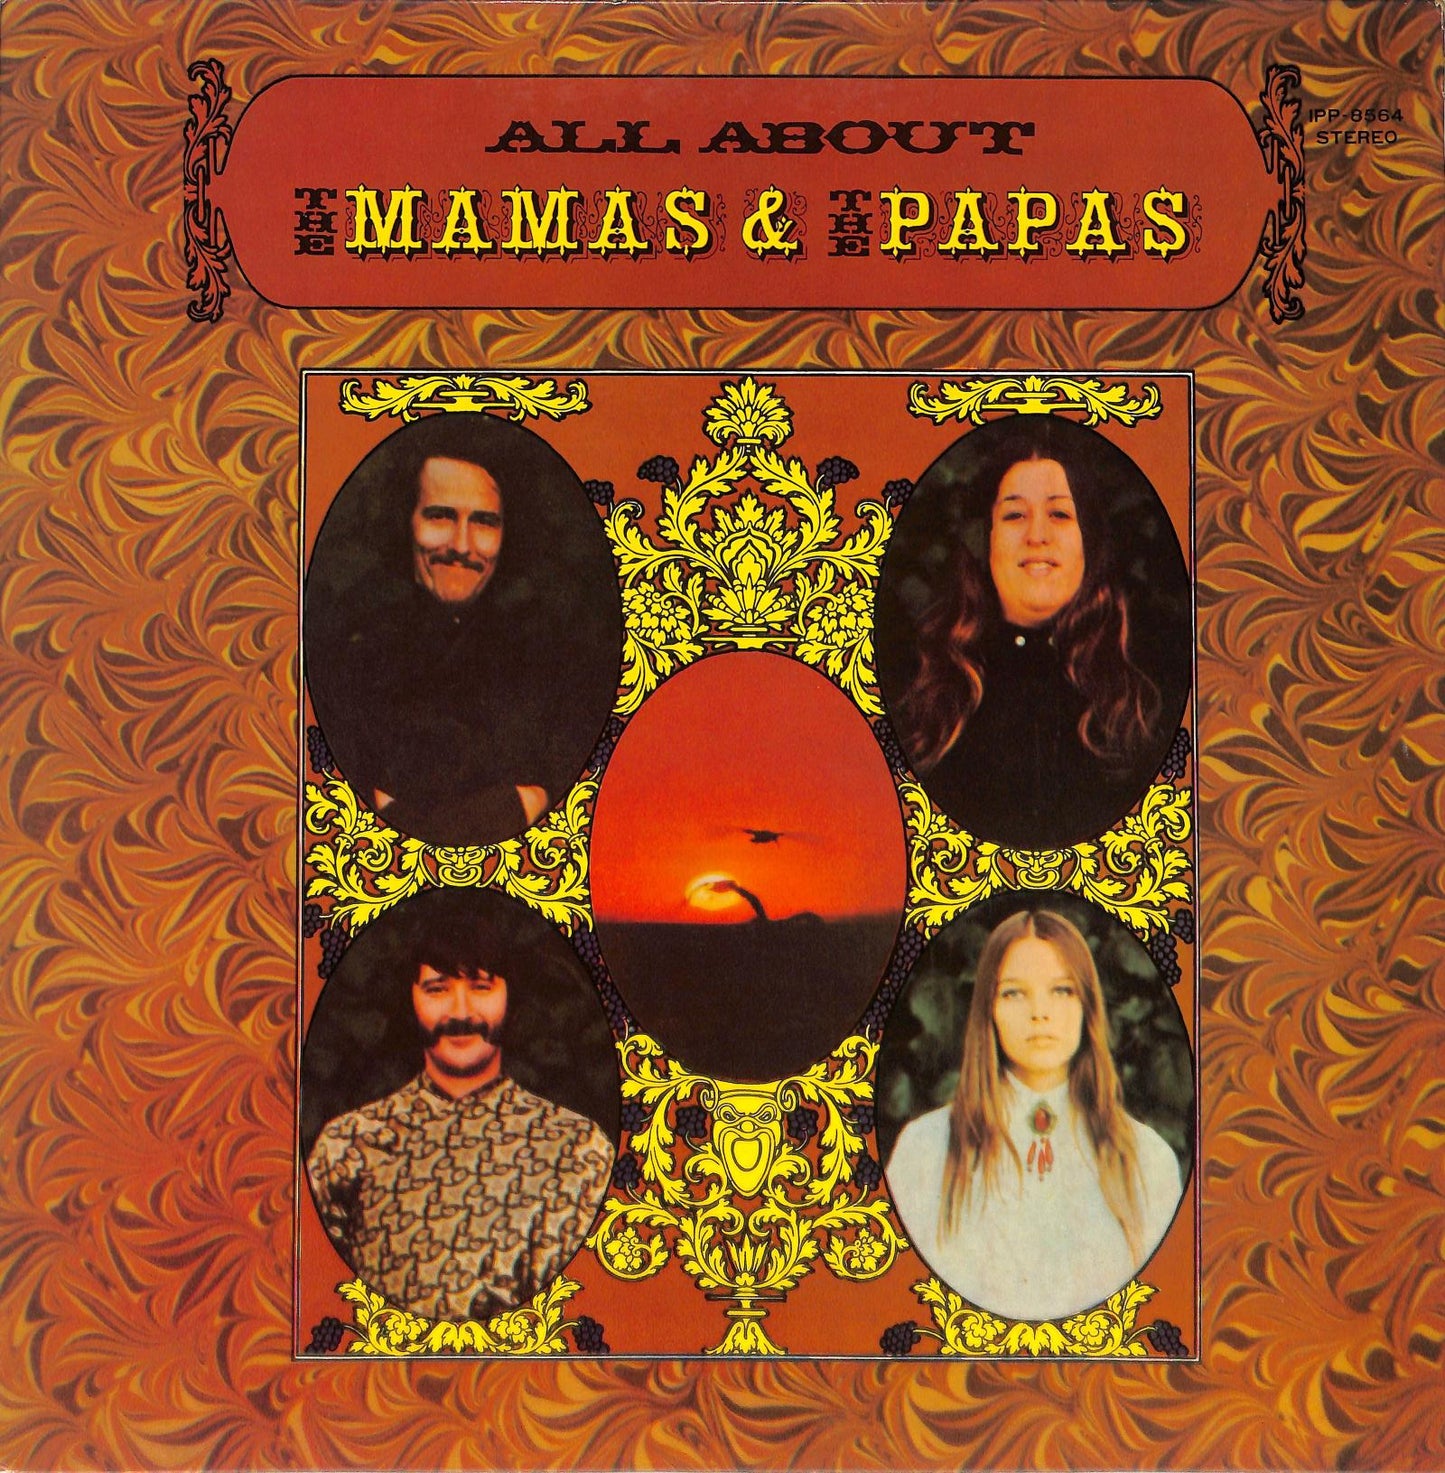 THE MAMAS & THE PAPAS - All About The Mamas & The Papas